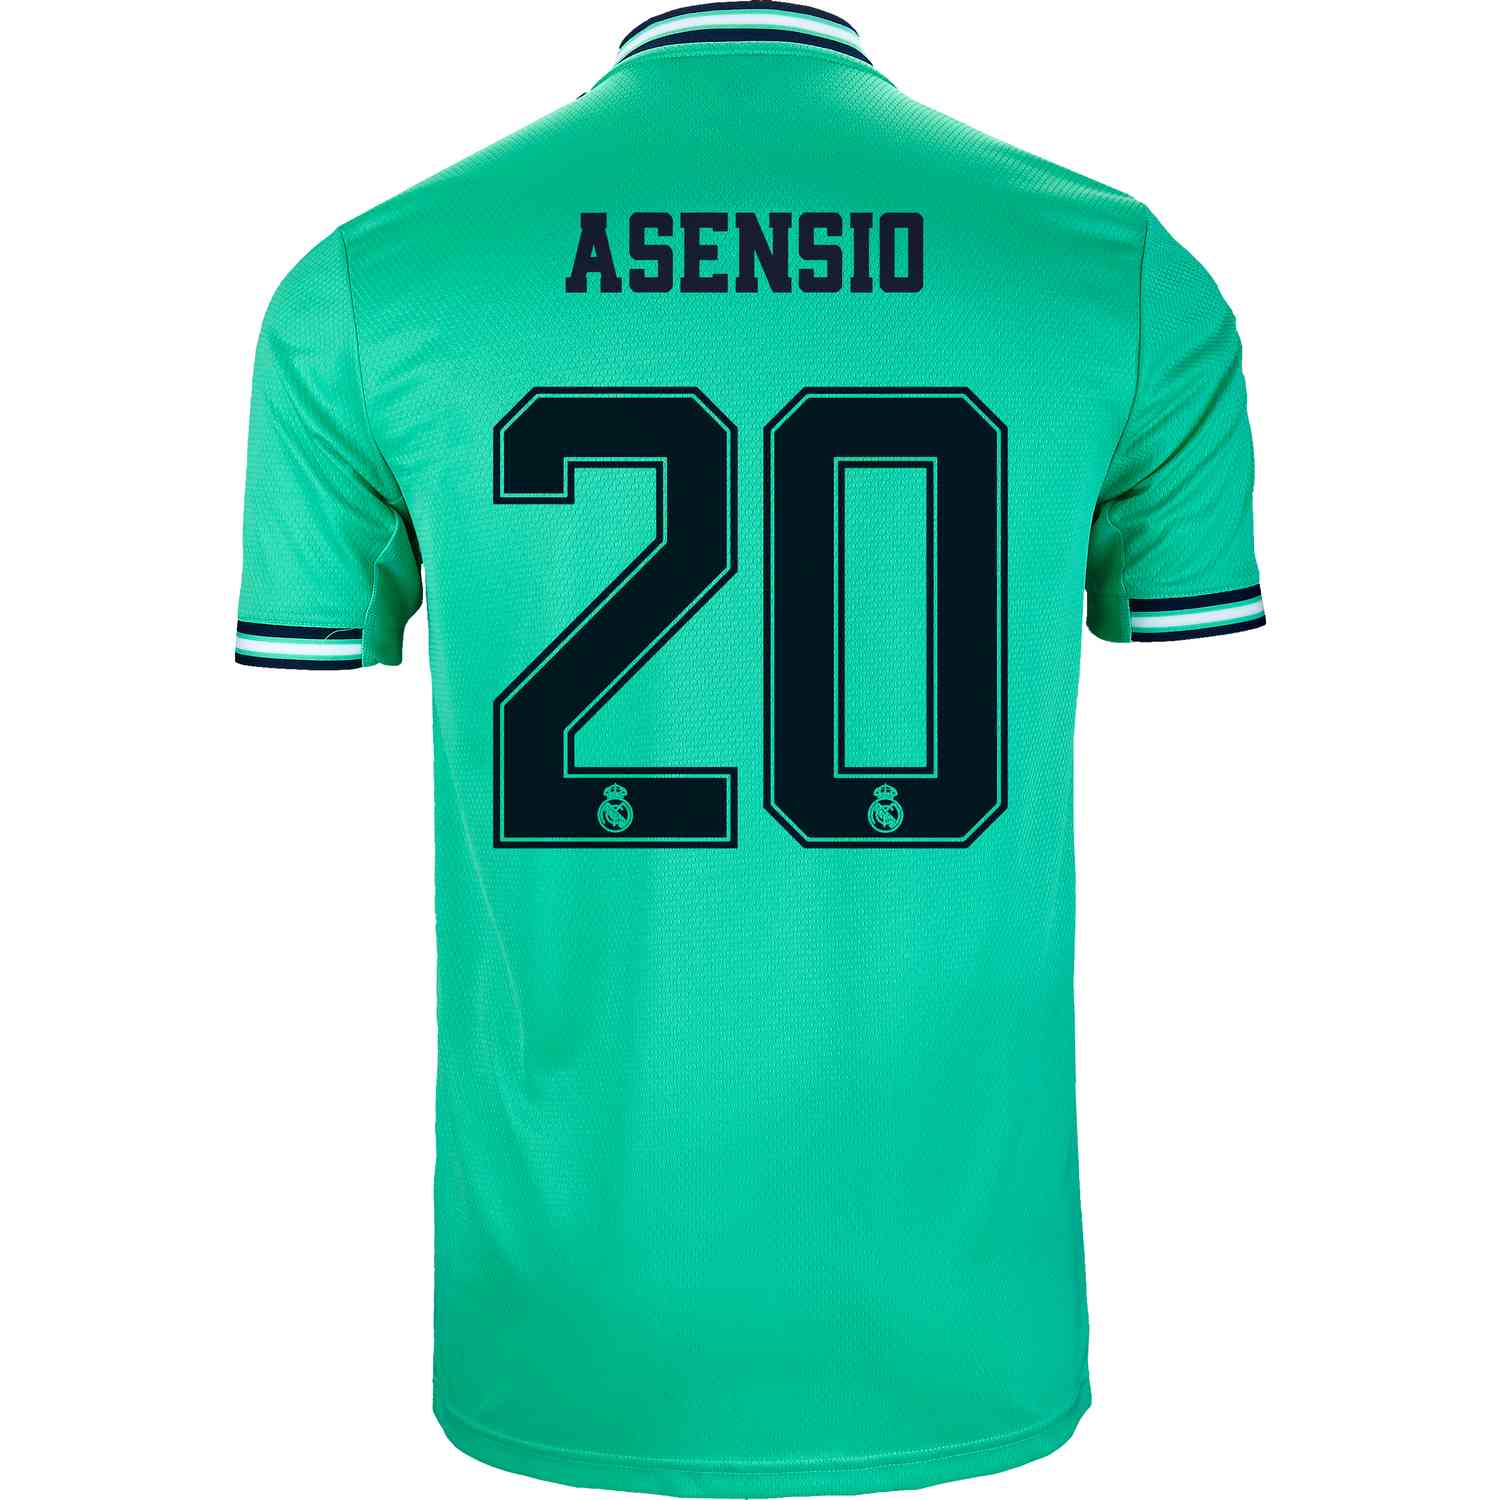 asensio jersey number